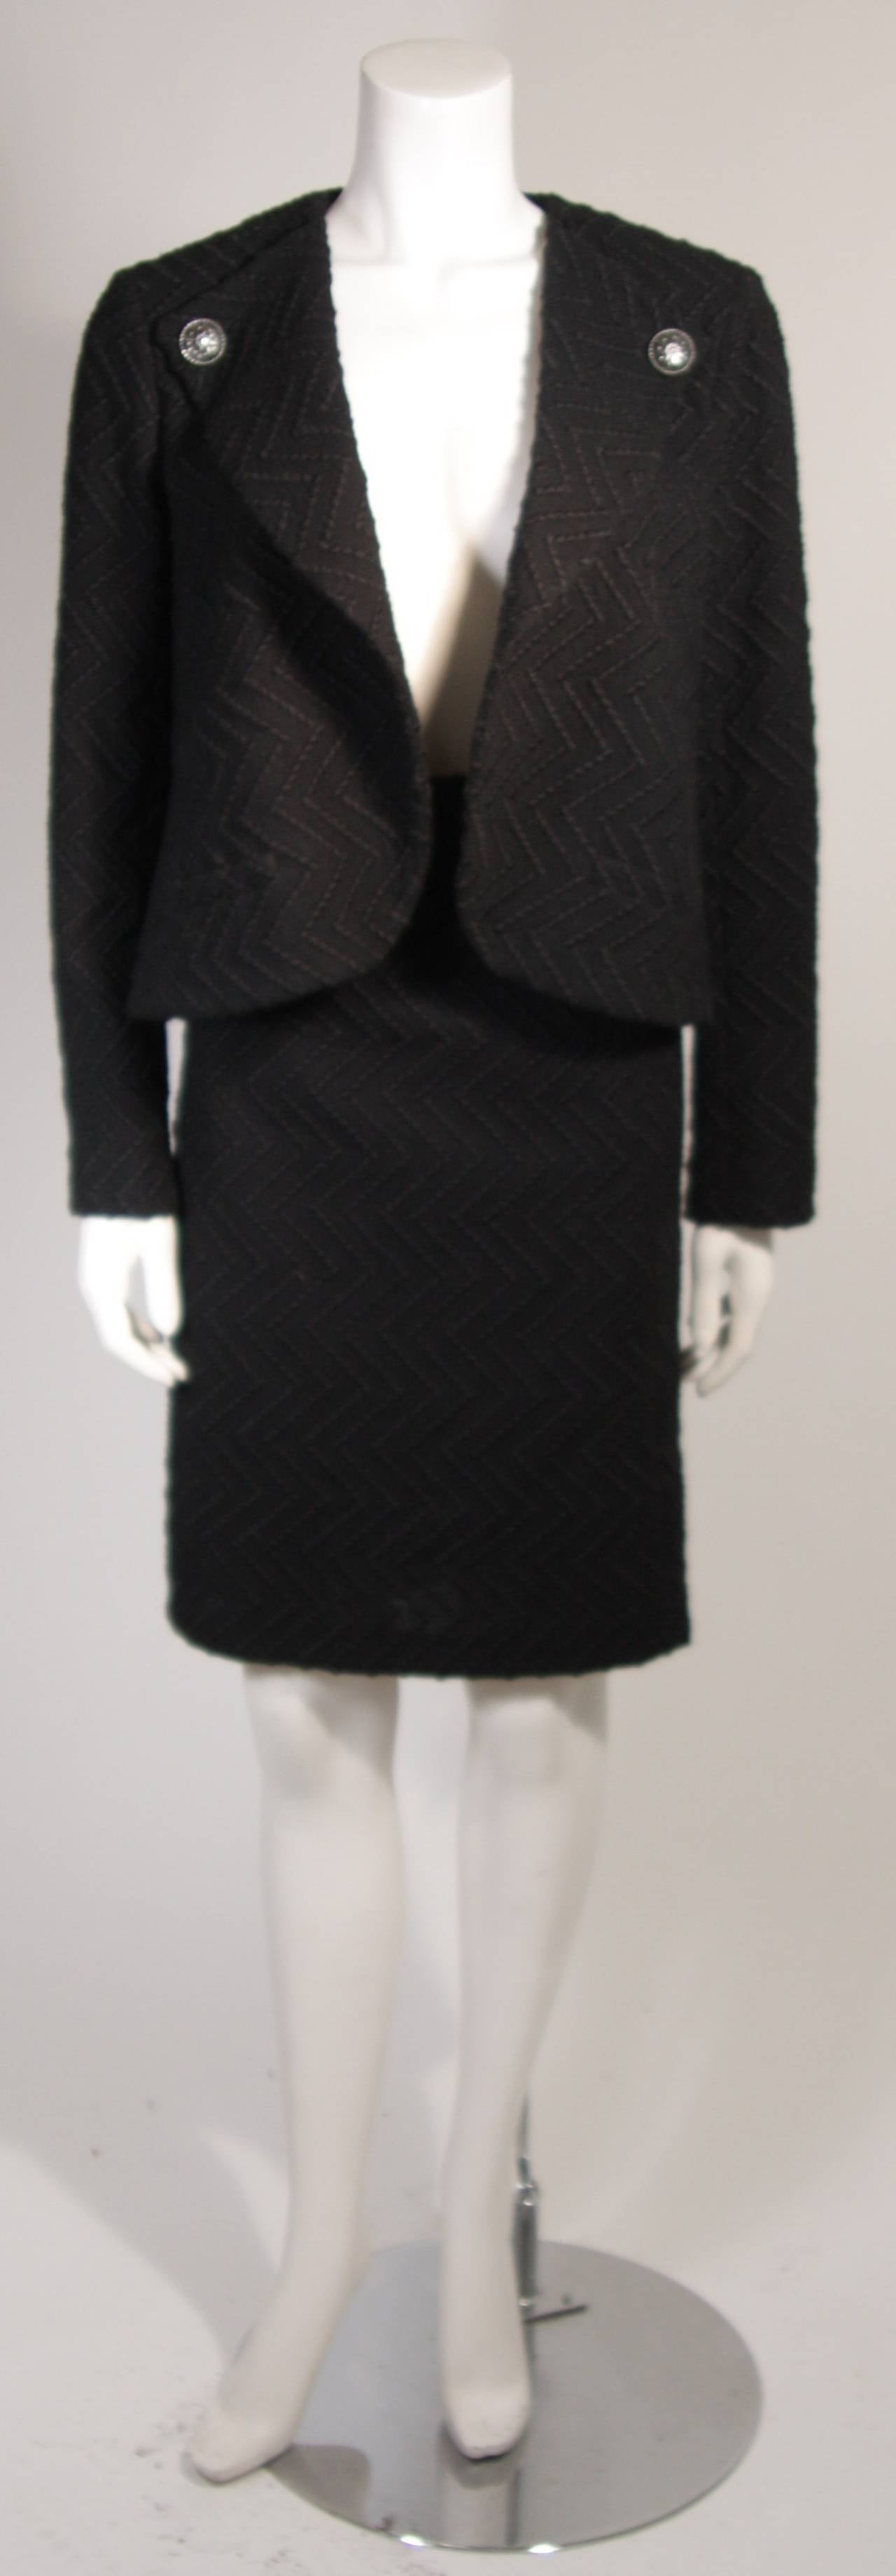 This is a Chanel suit. This suit features a drape style jacket and classic pencil skirt. The suit is composed of a supple black wool and has a lightweight silk lining with Chanel watermark logos. The jacket with drape style does not have any front